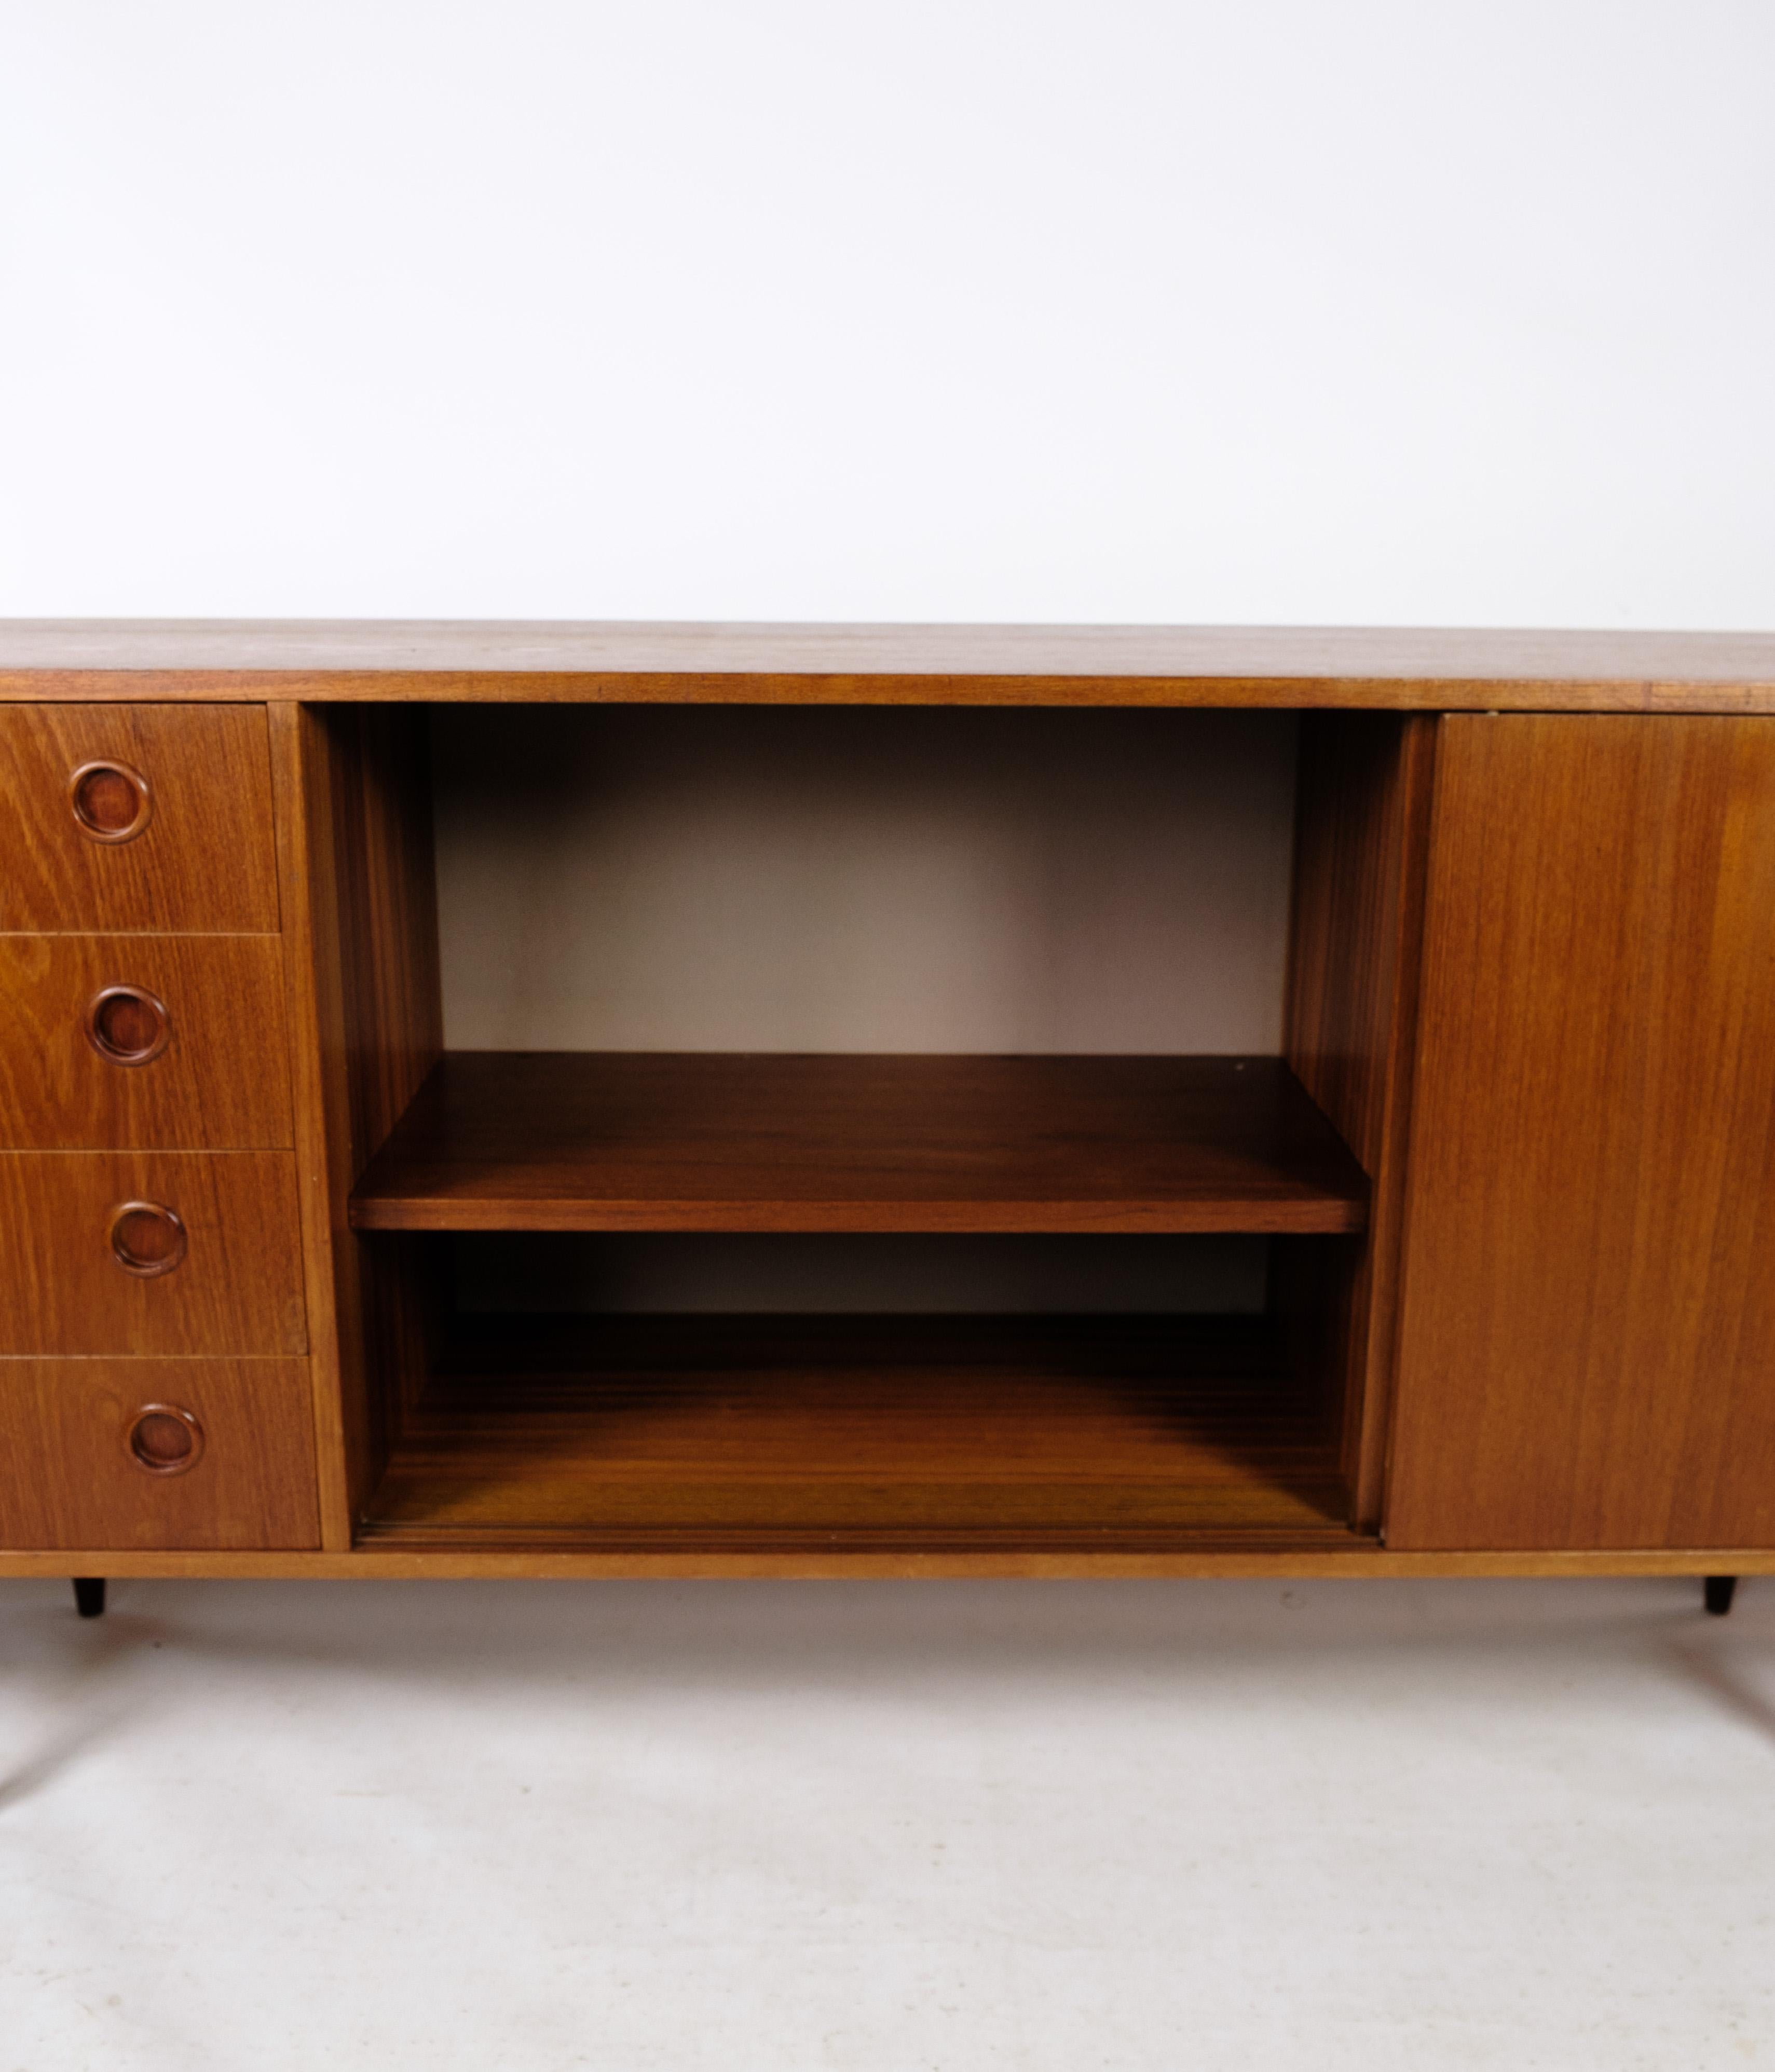 Sideboard Made In Teak, Danish Design From 1960s In Good Condition For Sale In Lejre, DK